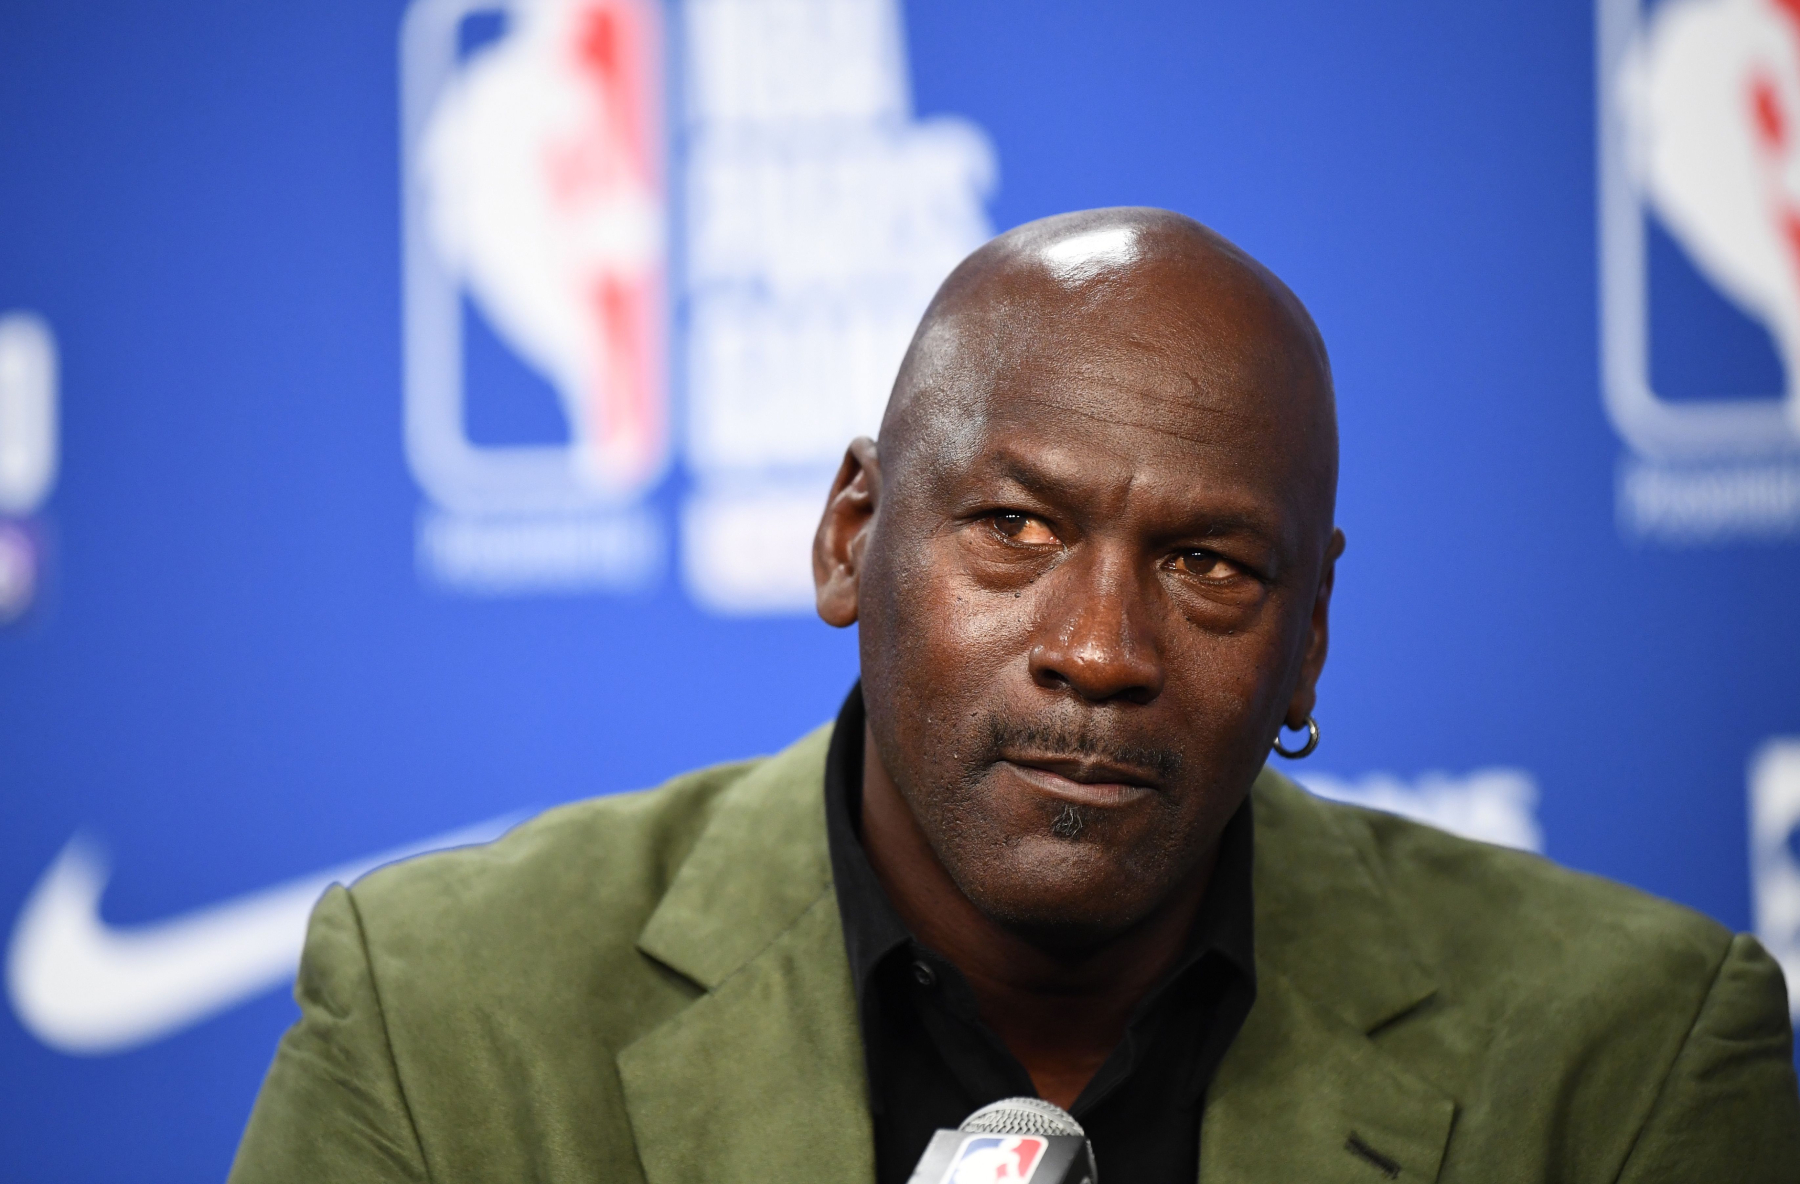 The 2020 NBA season was on the brink of ending this week. However, NBA legend Michael Jordan just played a crucial part in saving it.